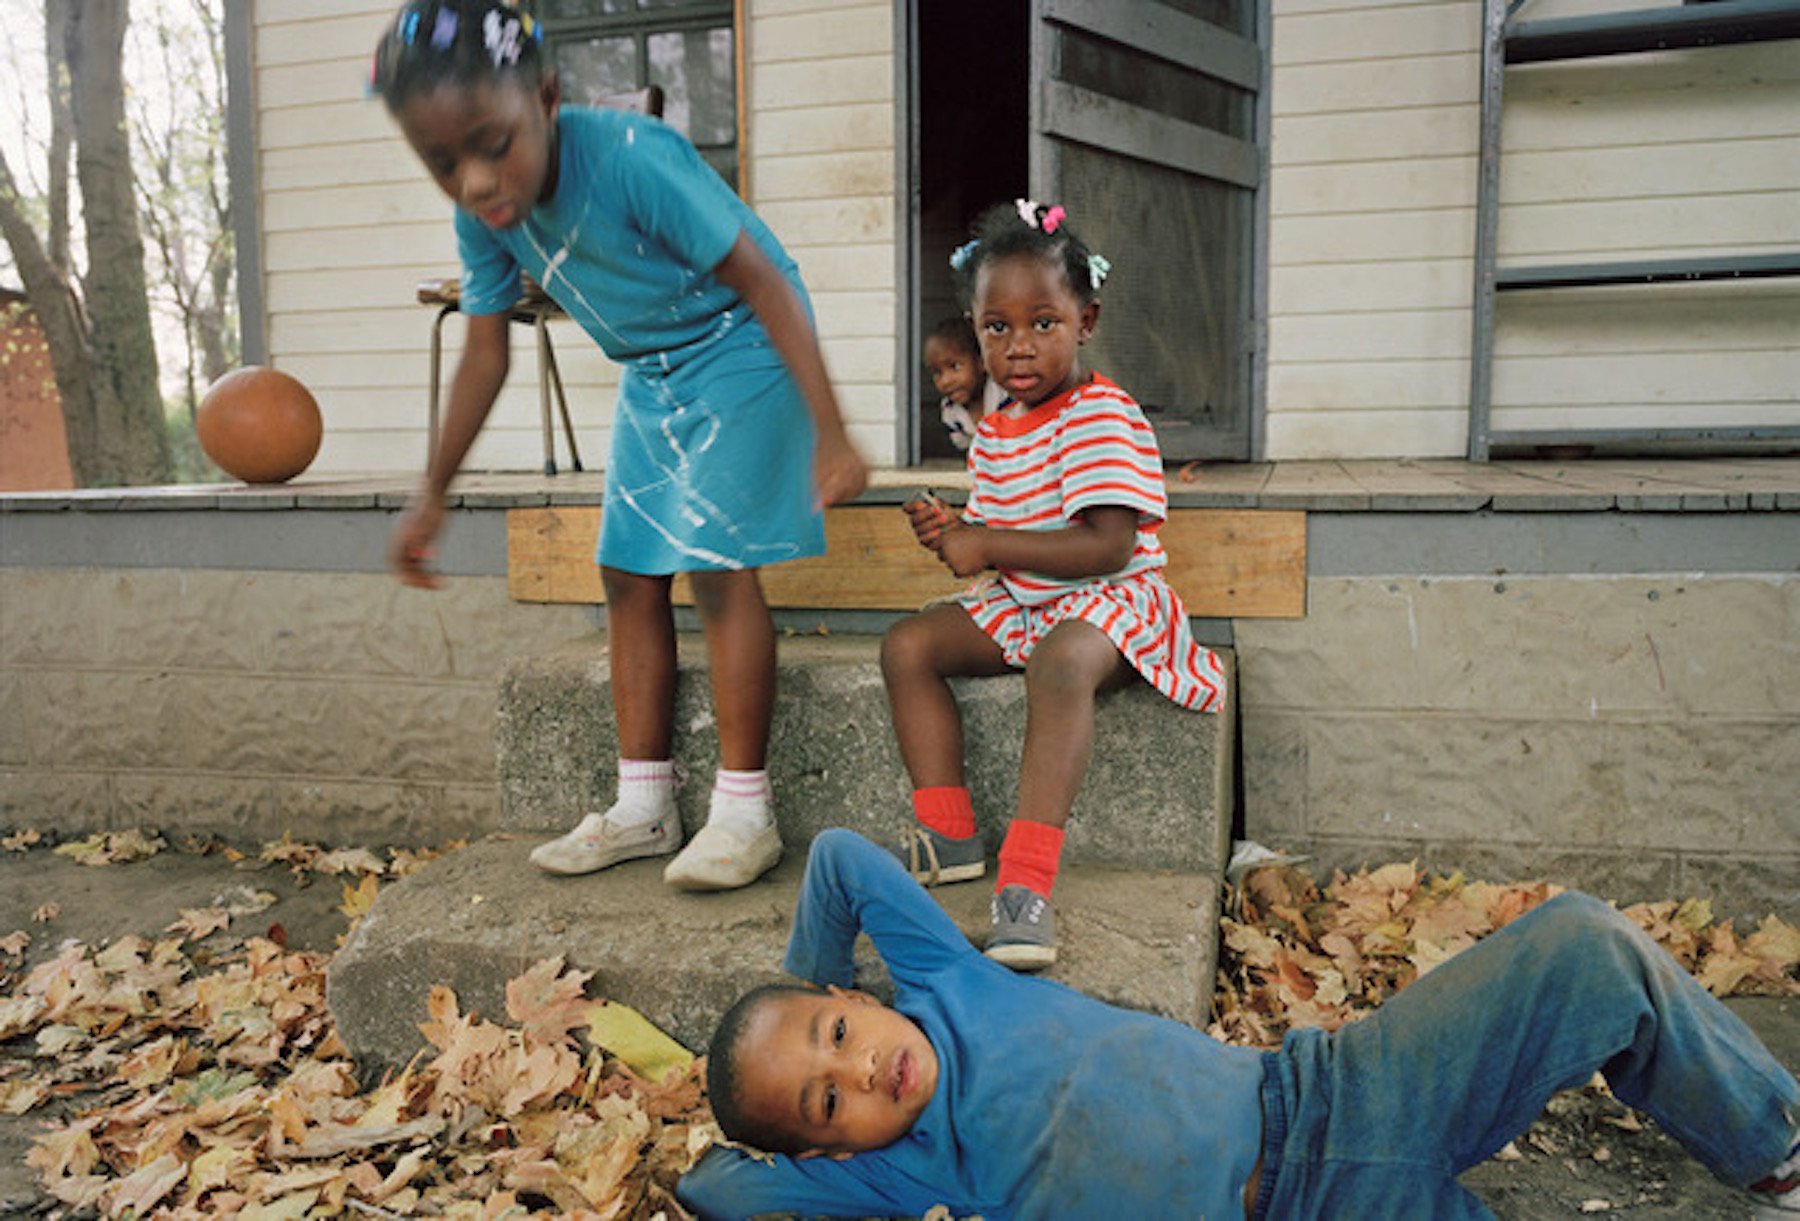  Sheron Rupp  Franklin, Tennessee  Image: 1990/printed: 2021 Edition: 1/10 Inkjet print 18 x 26 1/2 in. (image size)  The Do Good Fund, Inc., 2021-016 